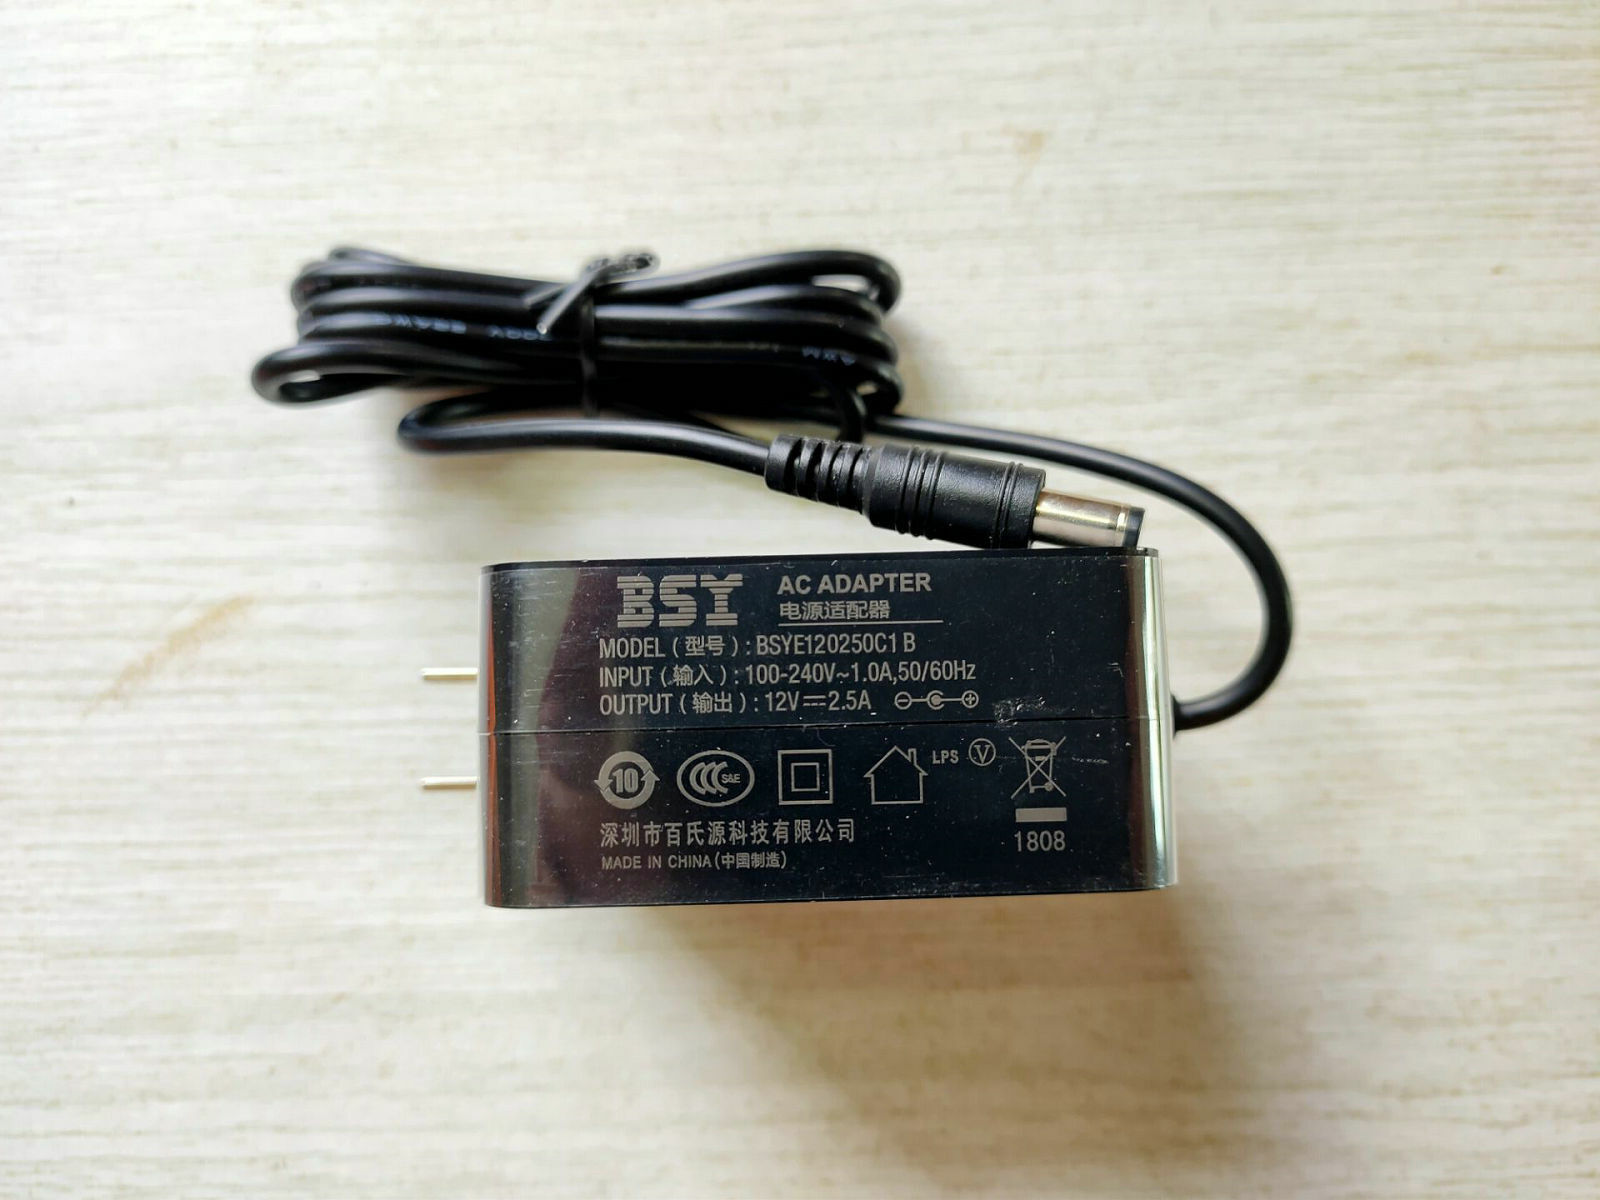 1pcs New AC Adapter Power Charger For BSY BSYE120250C1B 12V 2.5A 1pcs New AC Adapter Power Charger For BSY BSYE120250C1